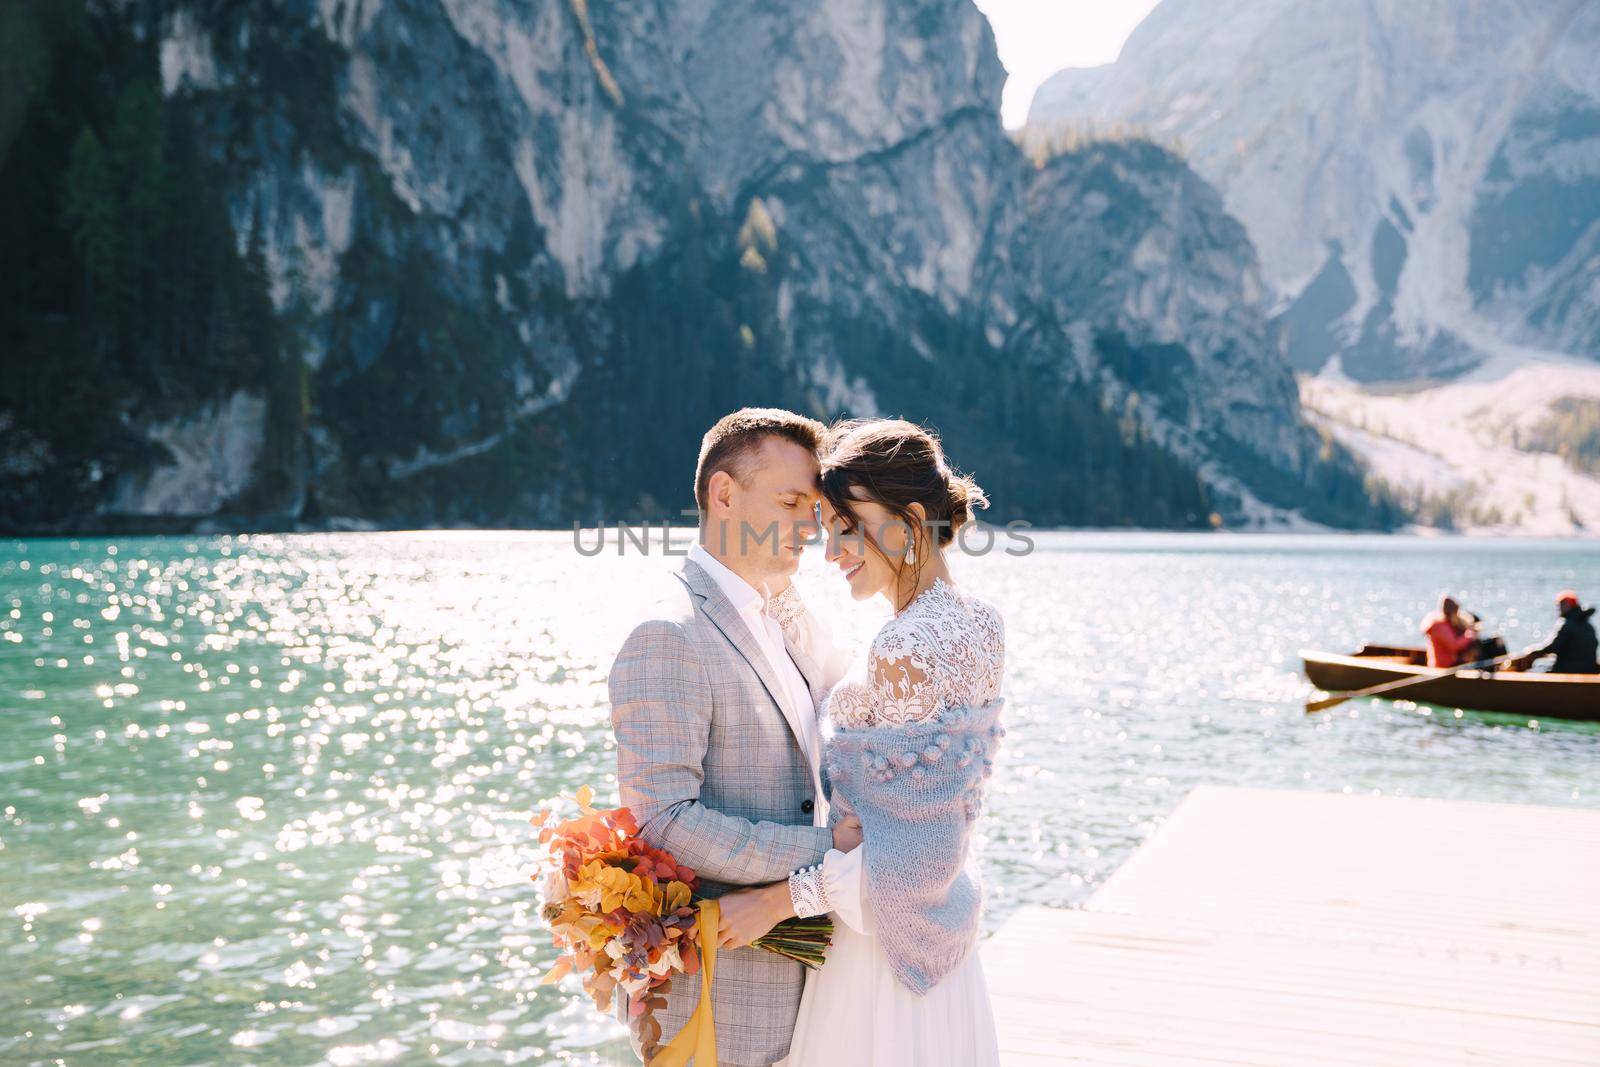 The bride and groom walk on a wooden boat dock at Lago di Braies in Italy. Wedding in Europe, at Braies lake. Newlyweds walk, kiss, cuddle against the backdrop of rocky mountains.